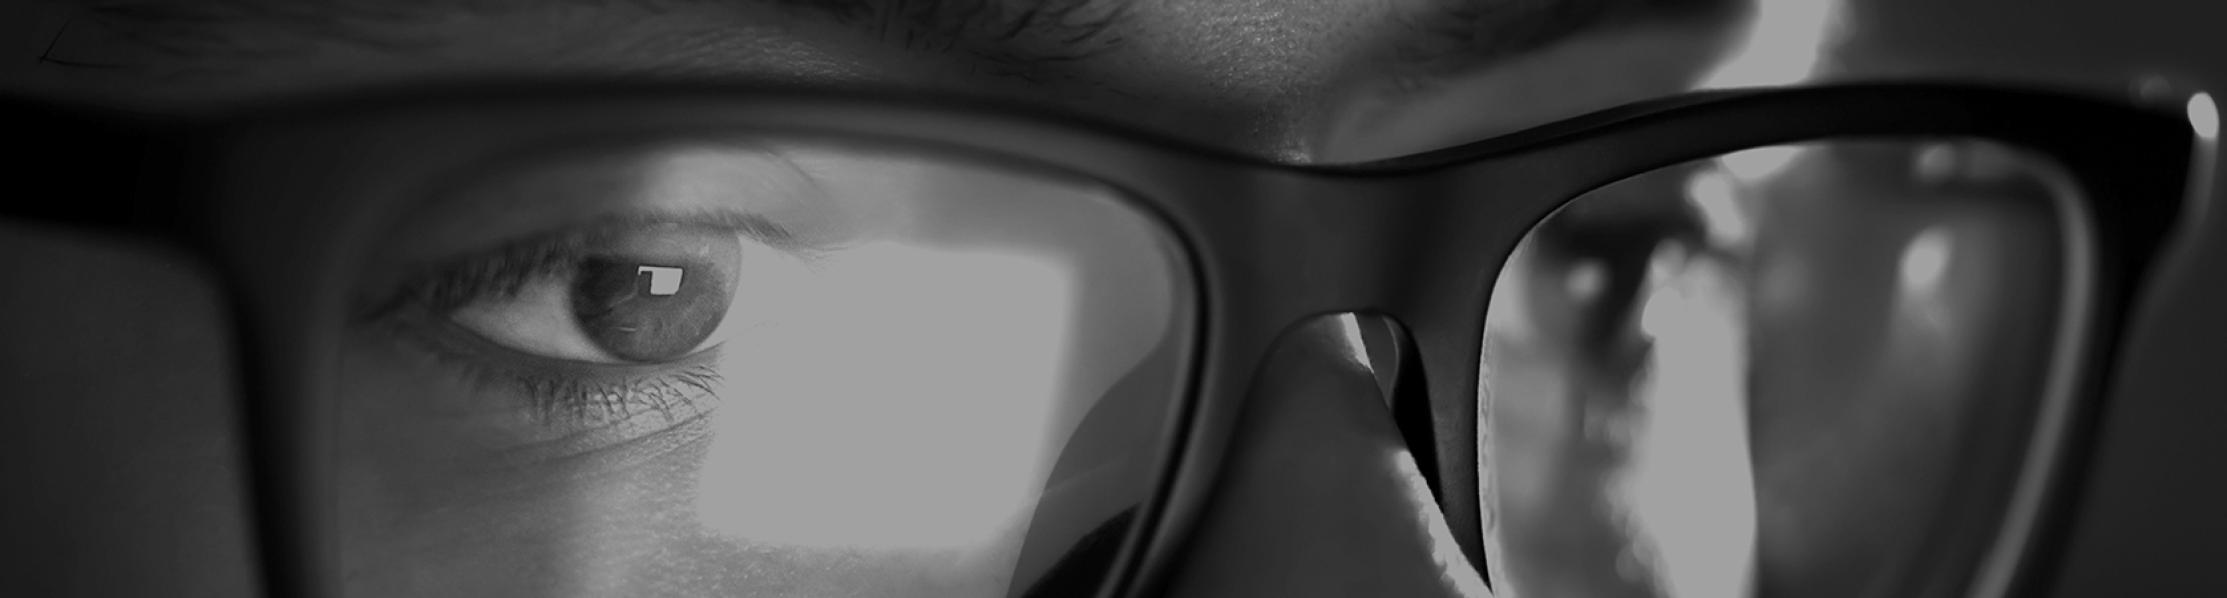 Graphic showing a man with glasses looking at a screen 